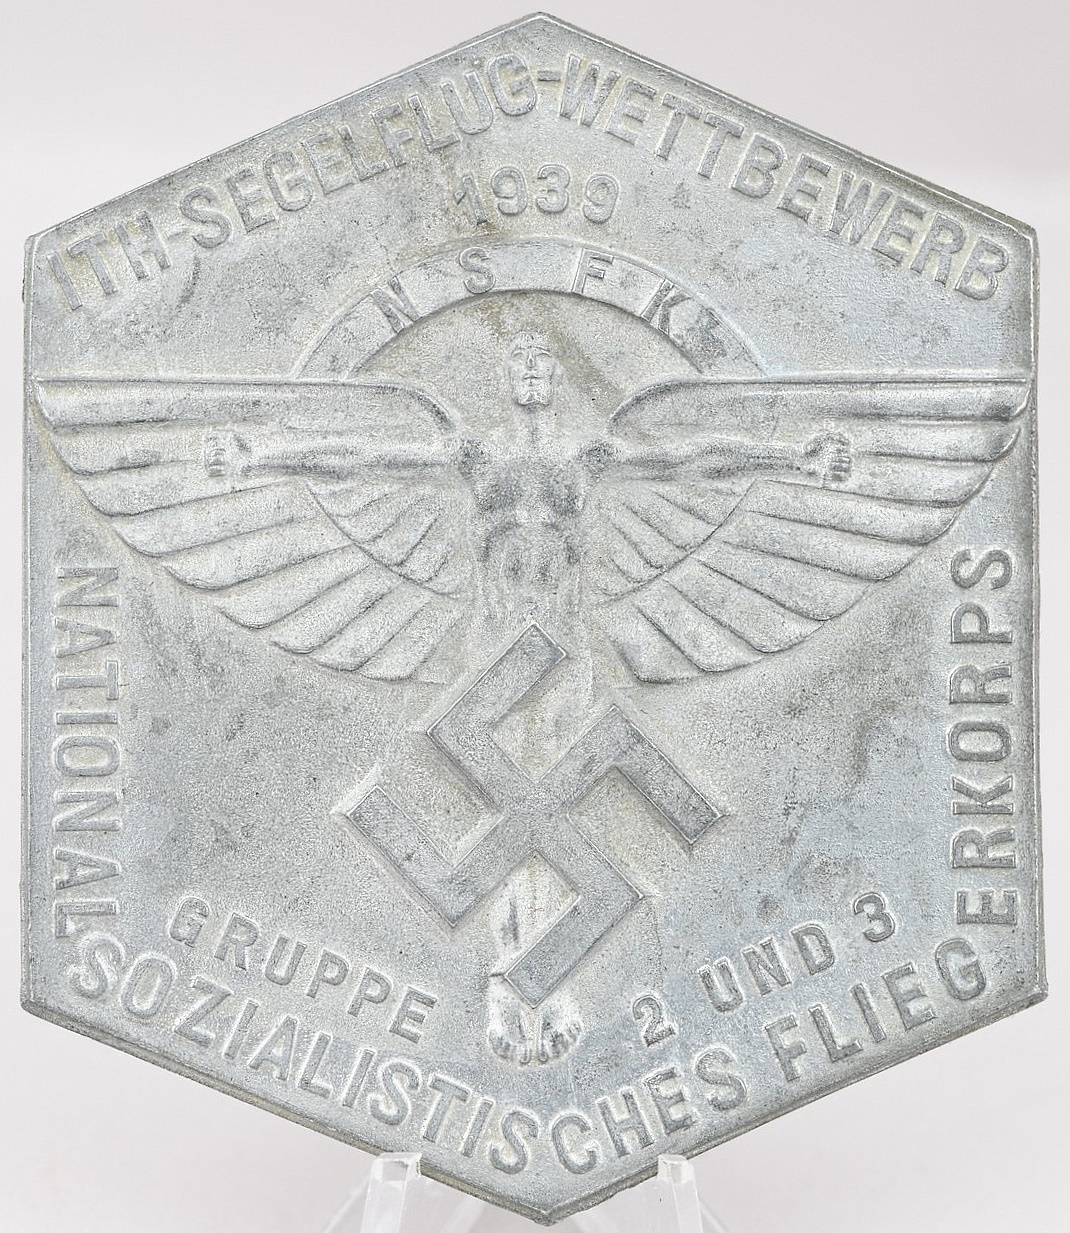 NSFK Competition Award 1939 Silver Plaque